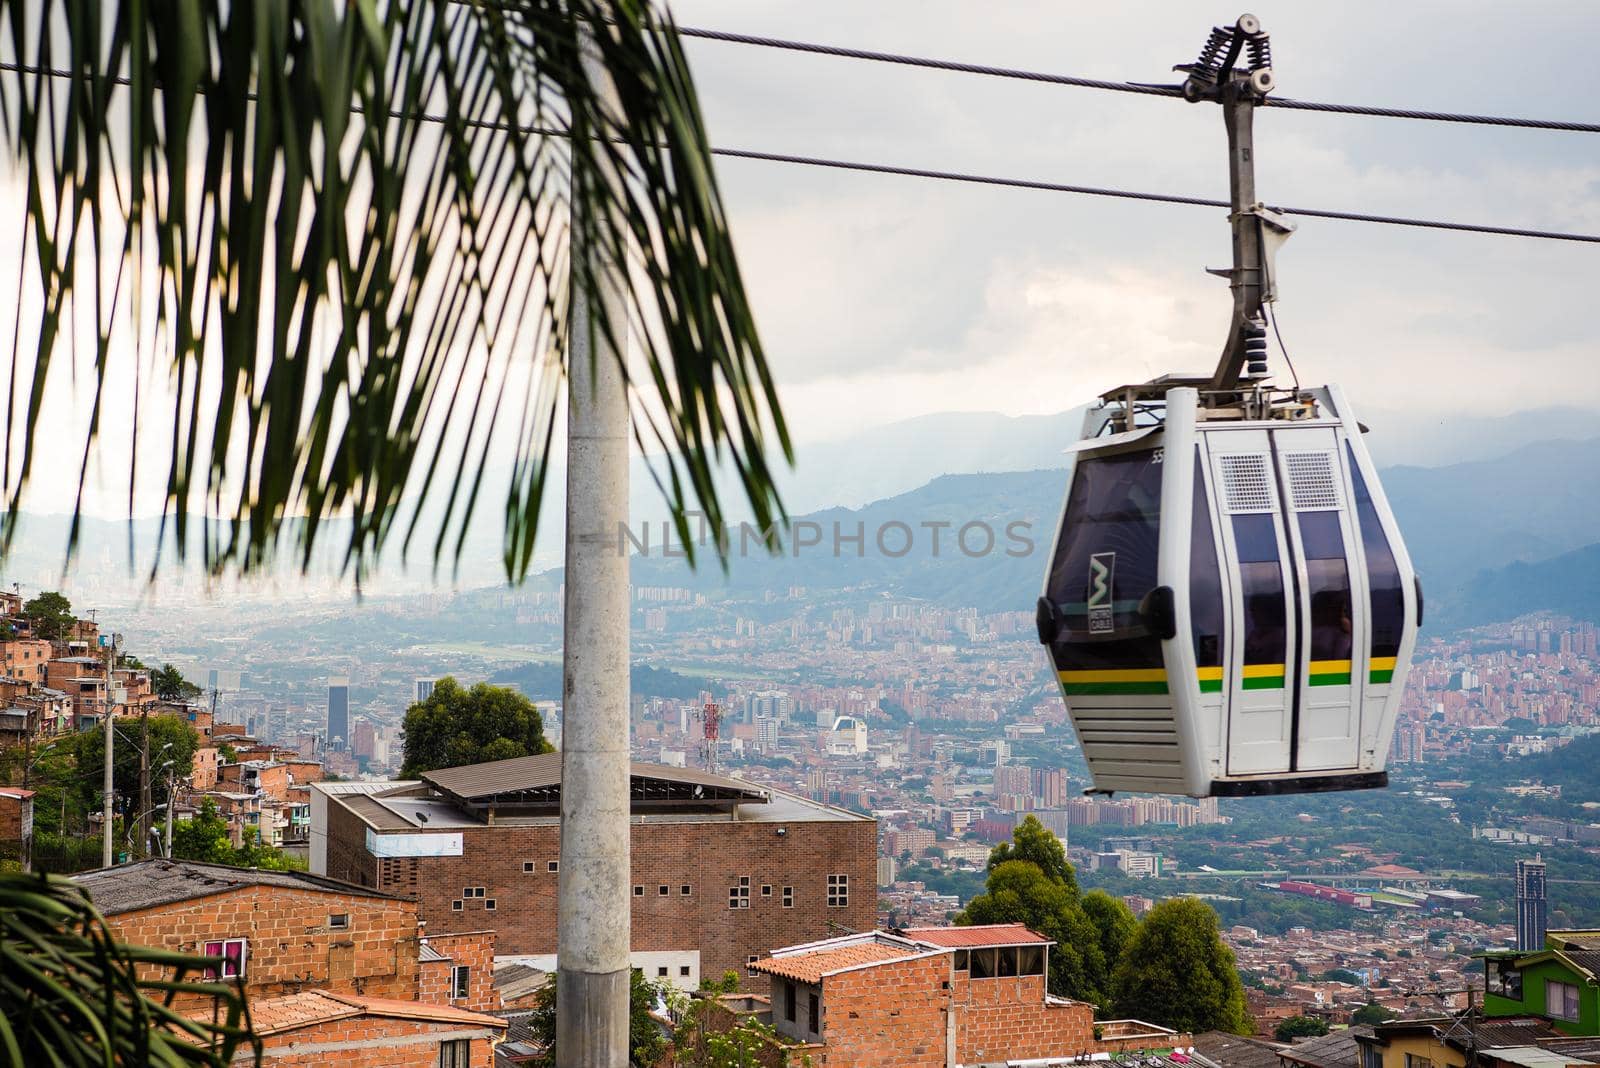 Cable car in transit in Medellin, Colombia. Palm tree in foreground